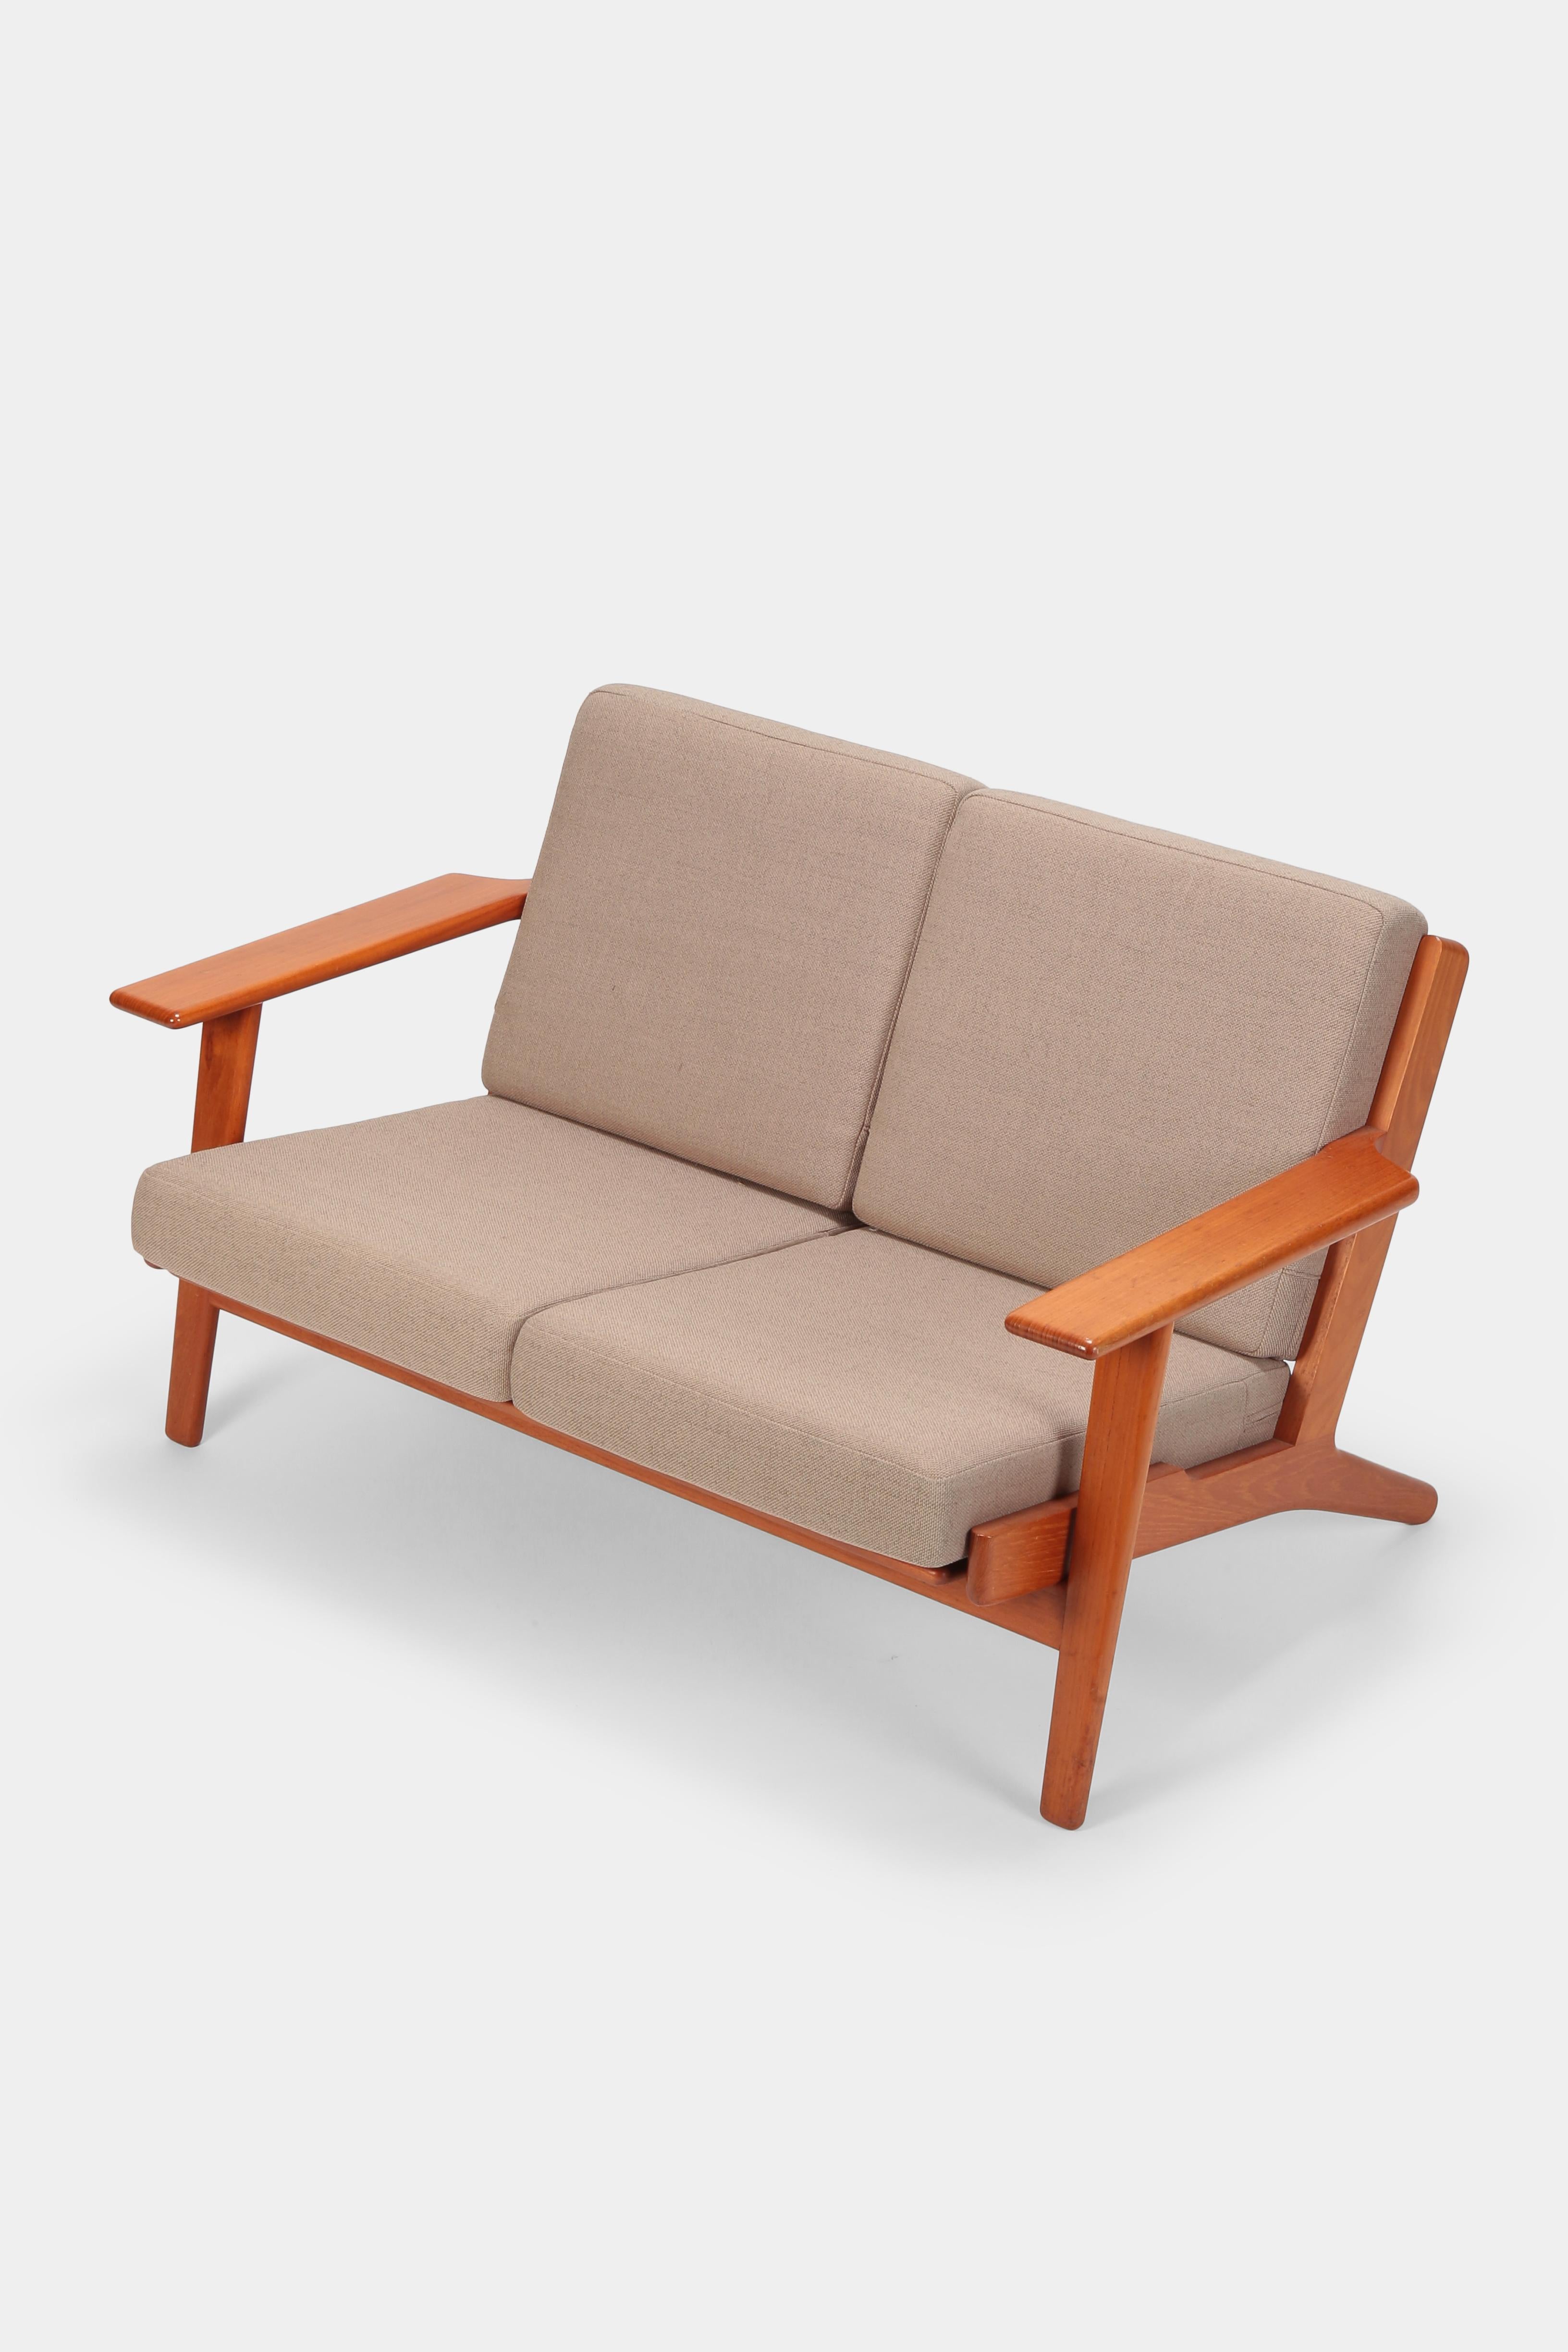 Description
Hans J. Wegner GE-290/2 sofa manufactured by GETAMA in the 1960s in Denmark. Beautiful two-seat sofa with a solid oakwood frame in organic design and four loose cushions newly covered with a wool fabric.